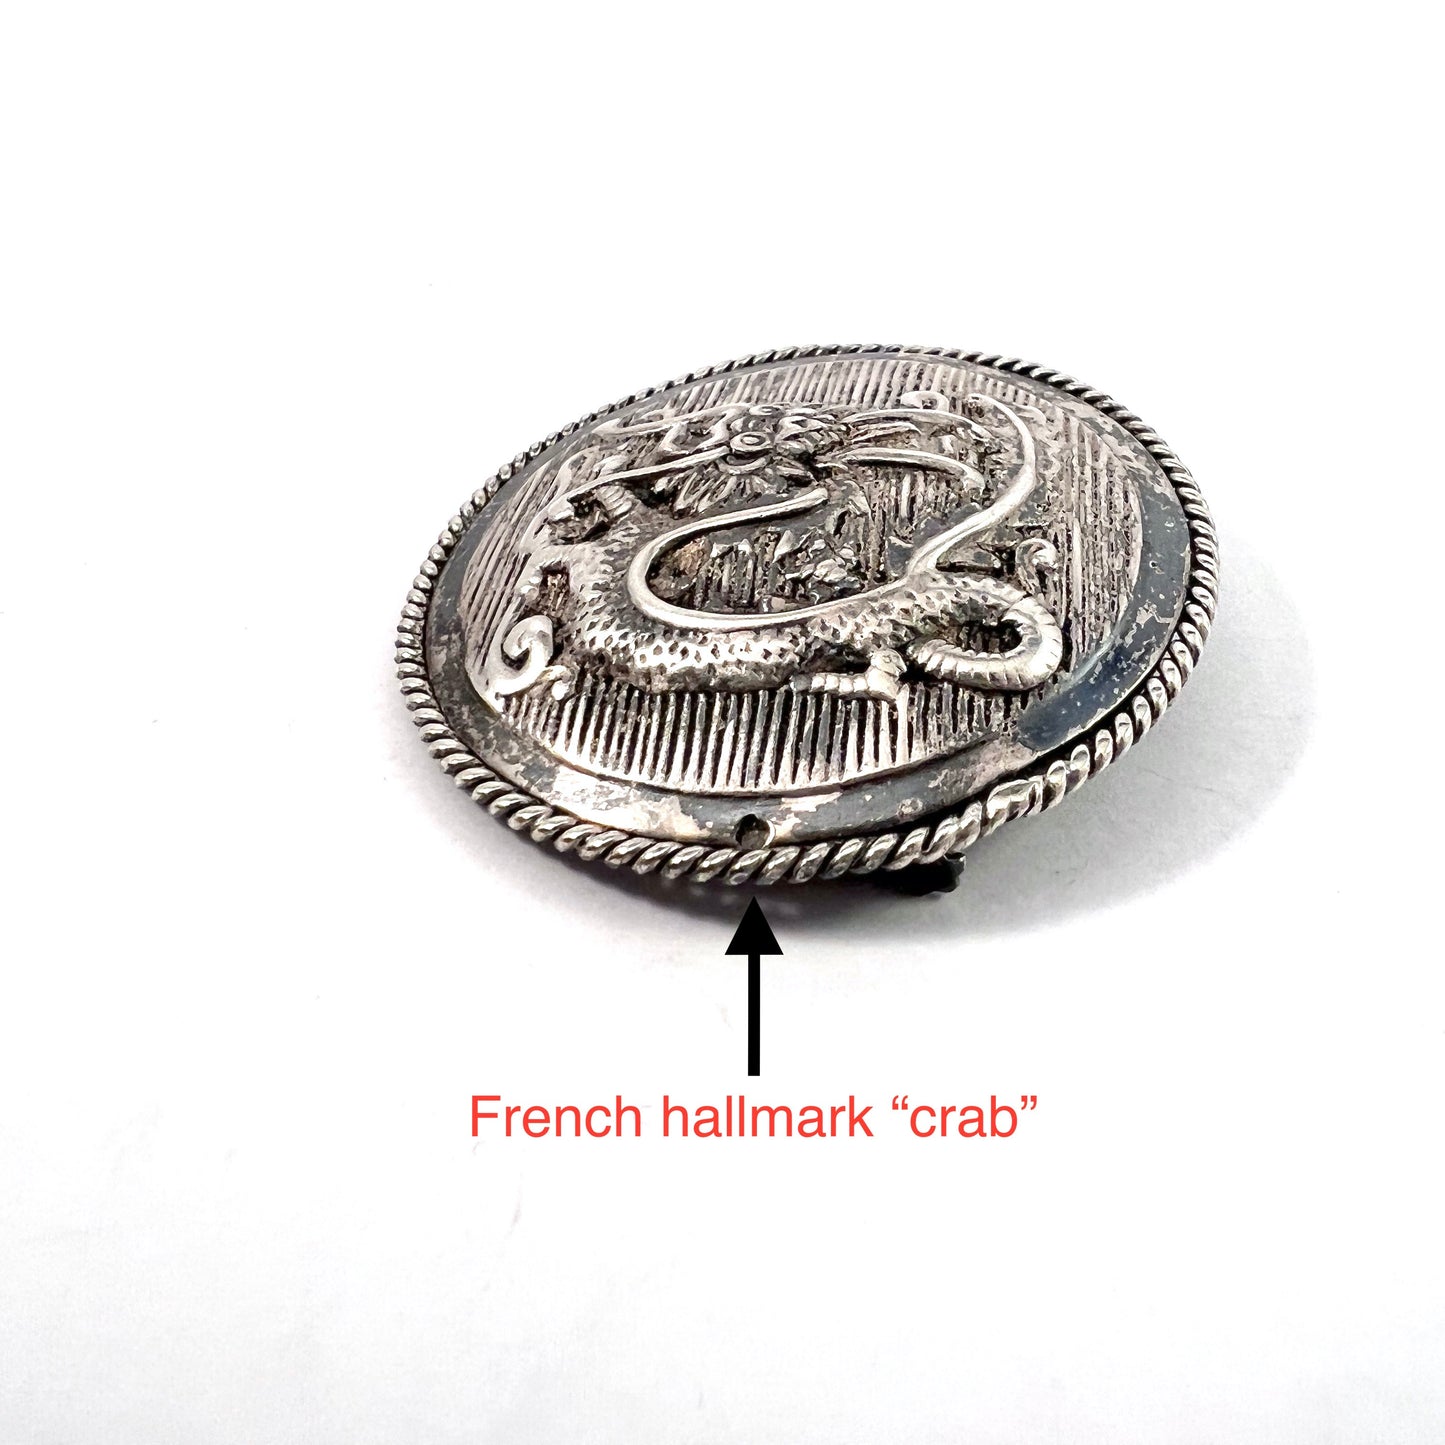 Maker FLAM, Made in France. 1930-40s. Sterling Silver Dragon Chinoiserie Brooch.